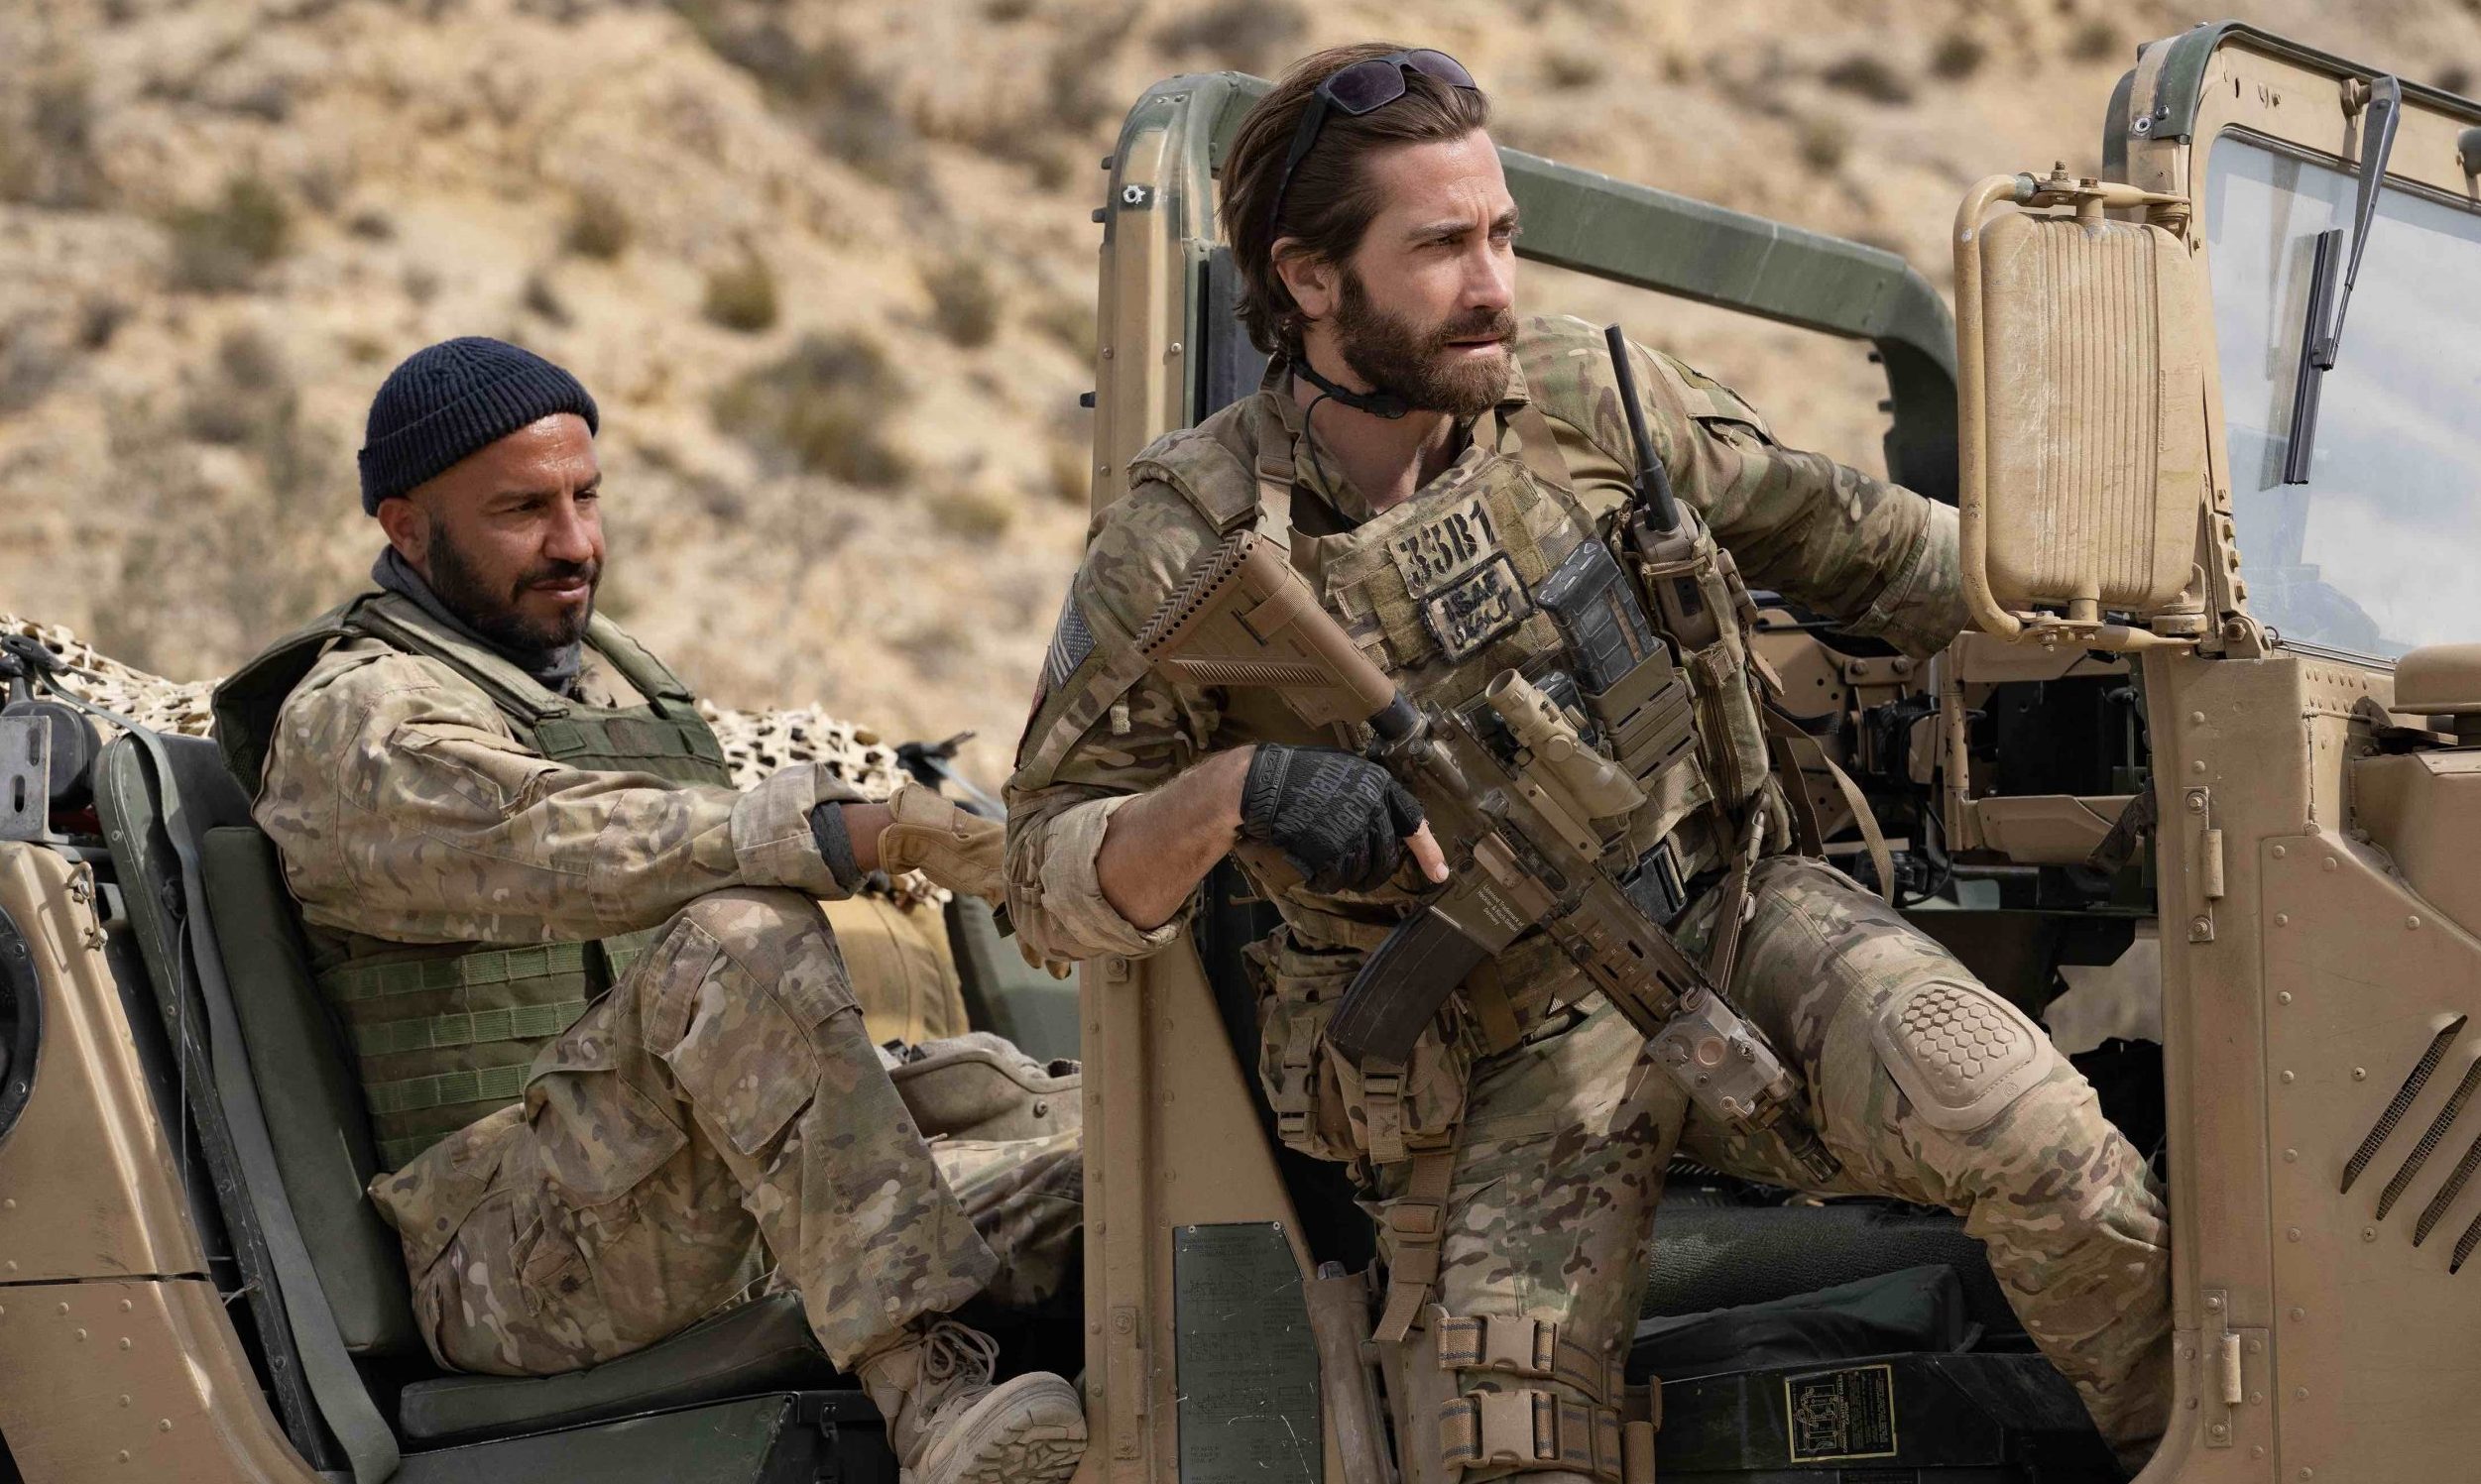 Jake Gyllenhaal takes on the Taliban in the first trailer